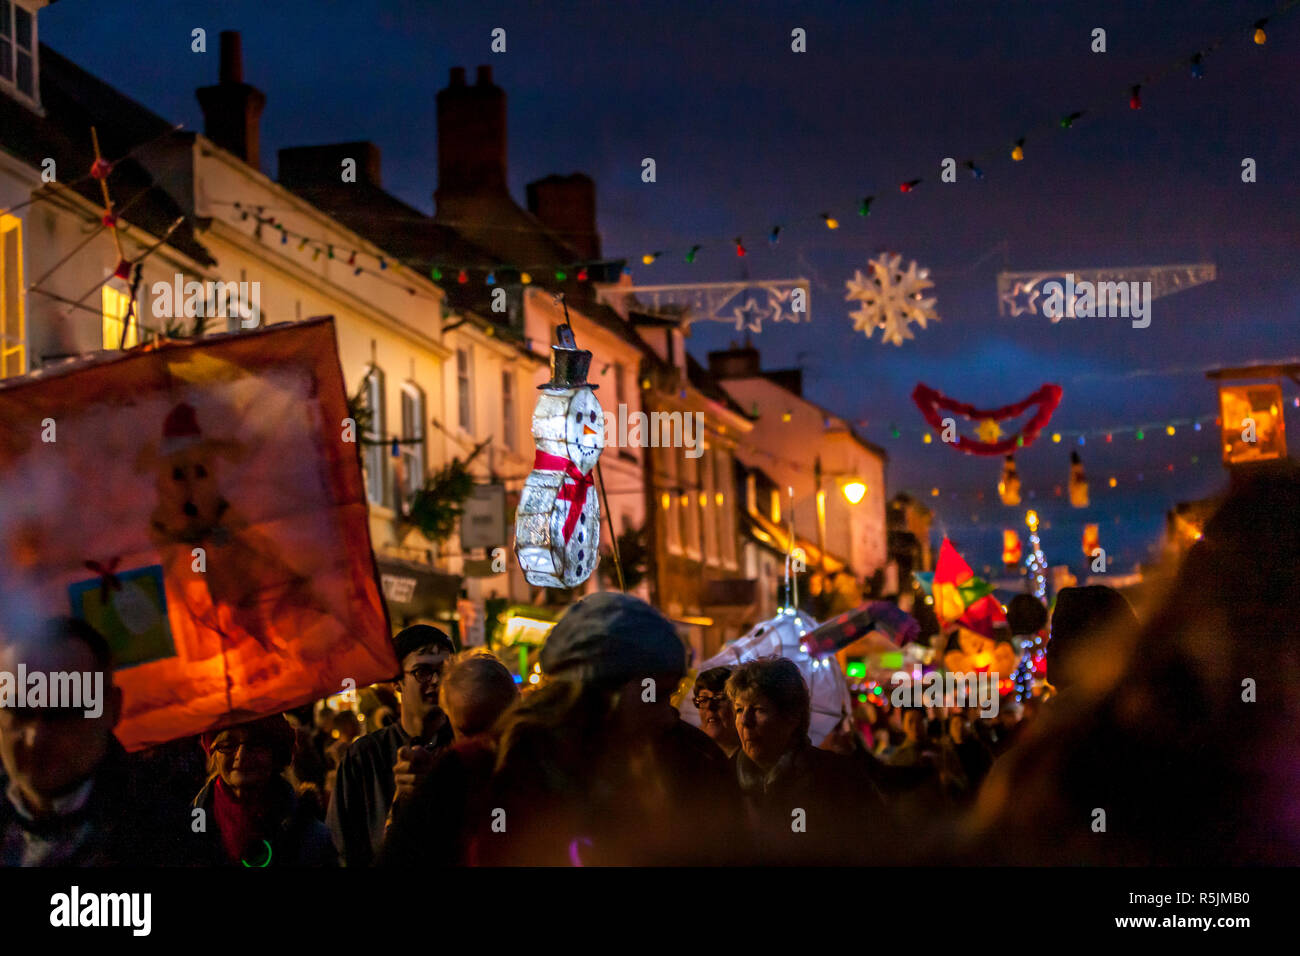 Stony Stratford. North Buckinghamshire, UK.1st December 2018. Lantern Parade with just over 280 lanterns, most of these have been made by families and young children at York House Centre, a Youth, Community and Arts centre over the last few months. The Lantern procession making its way down the packed hight street on it’s way to the Market Square, Credit: Keith J Smith./Alamy Live News Stock Photo